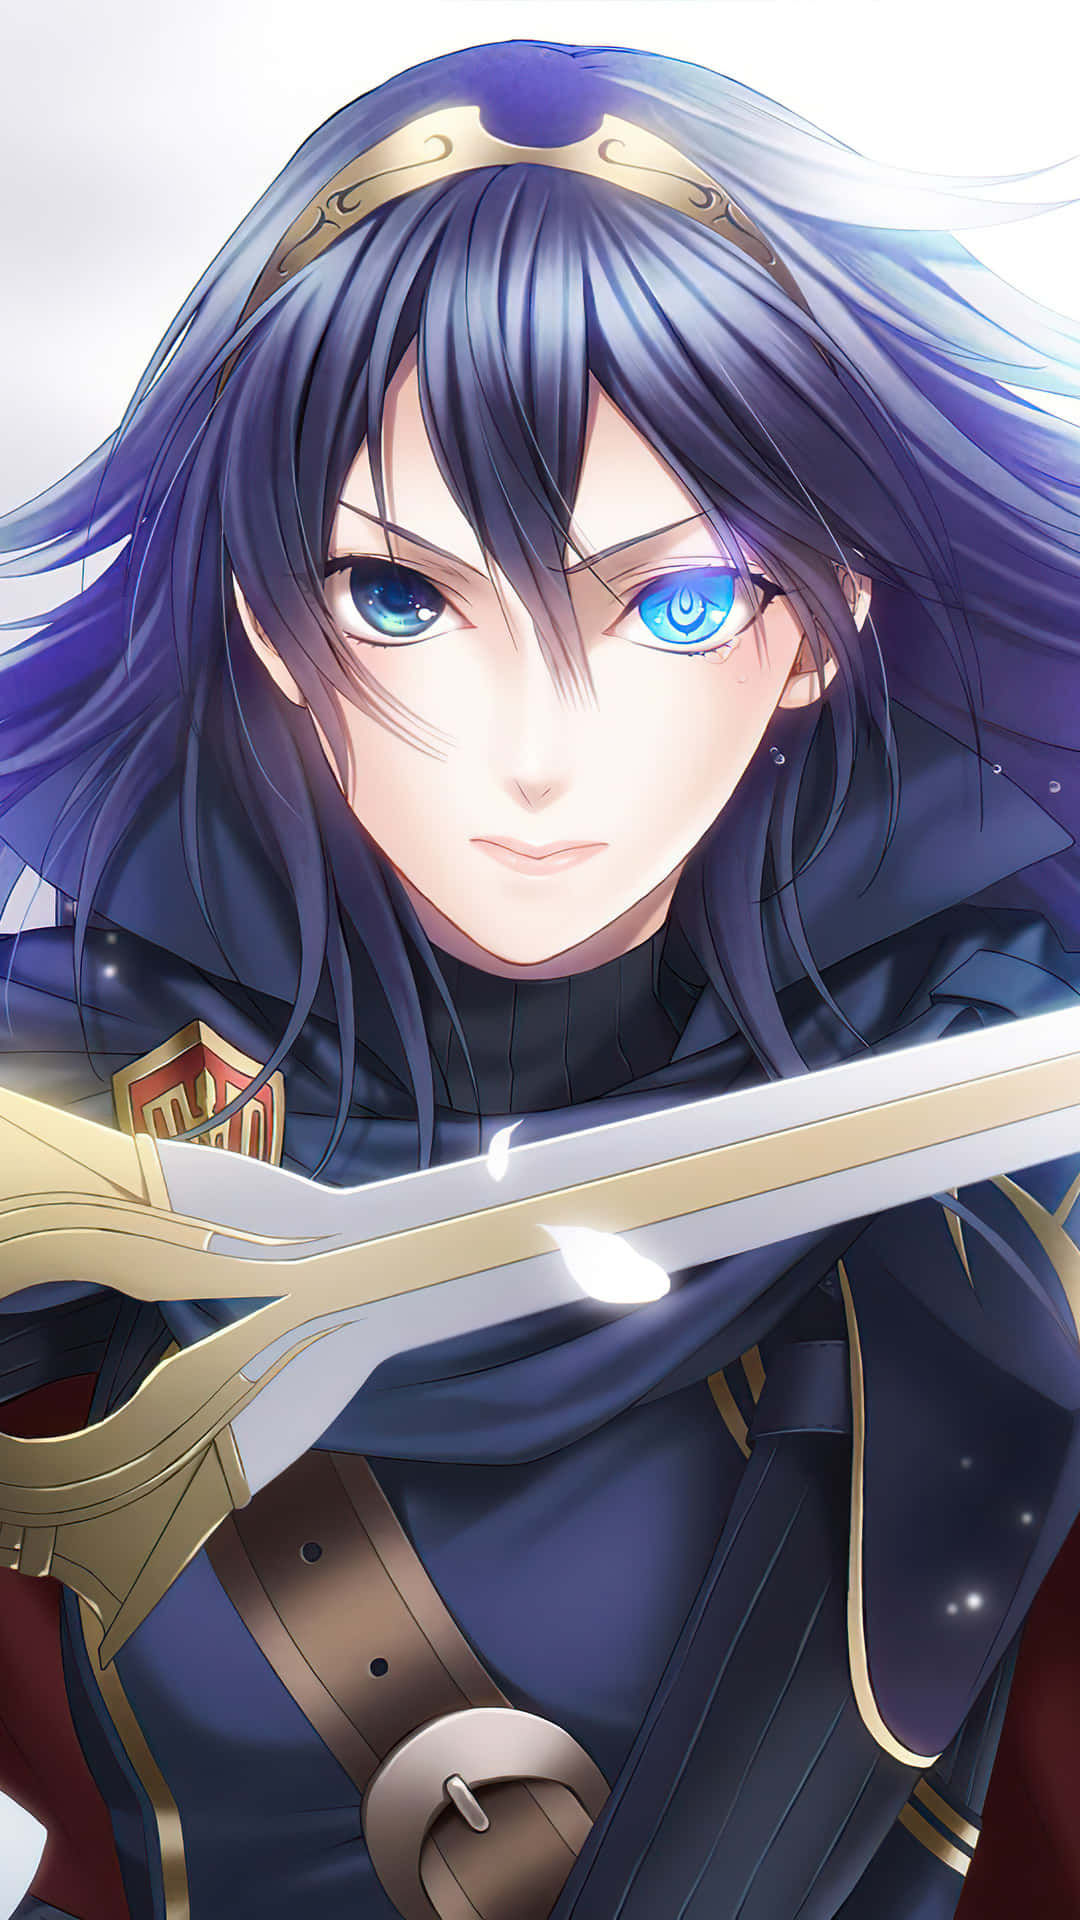 A Girl With Blue Eyes Holding A Sword Wallpaper